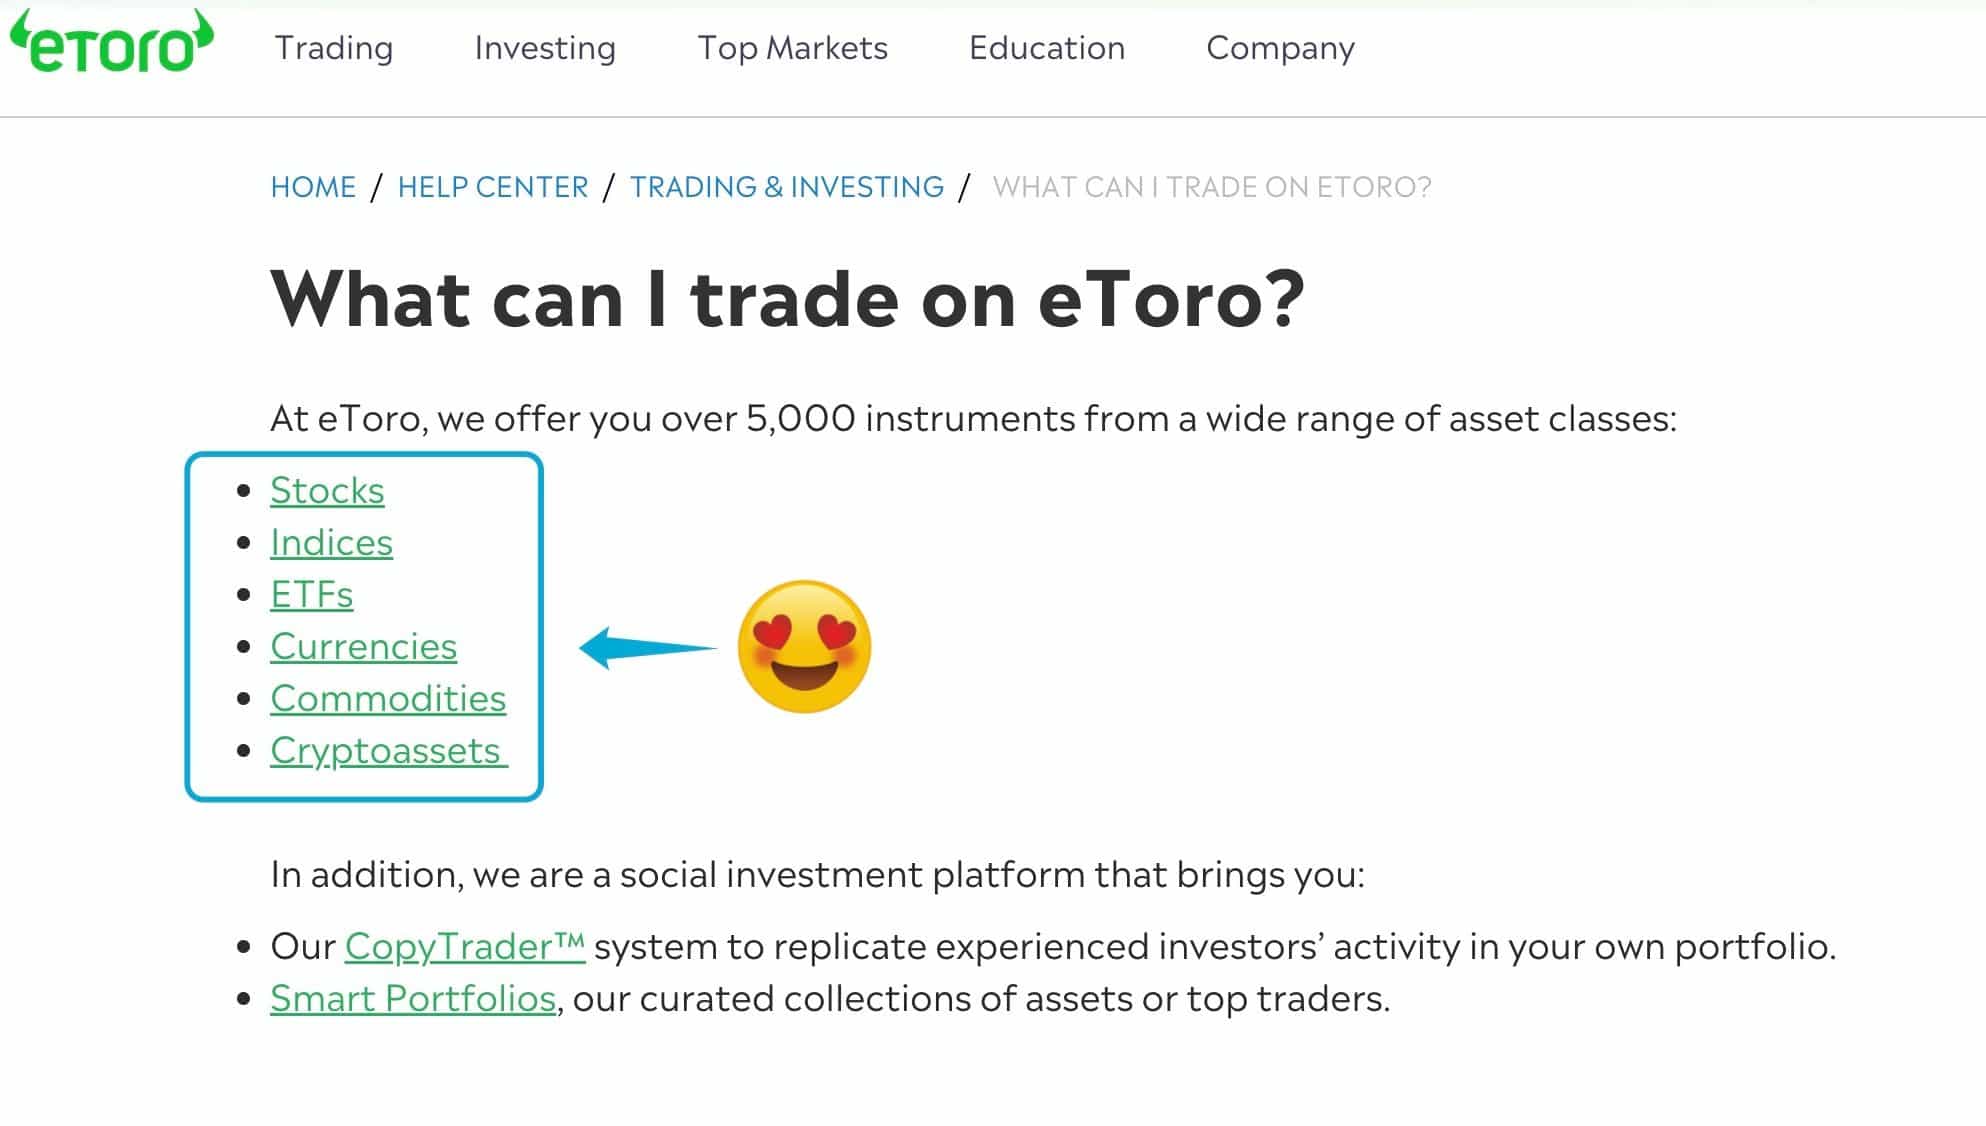 what can I trade on eToro